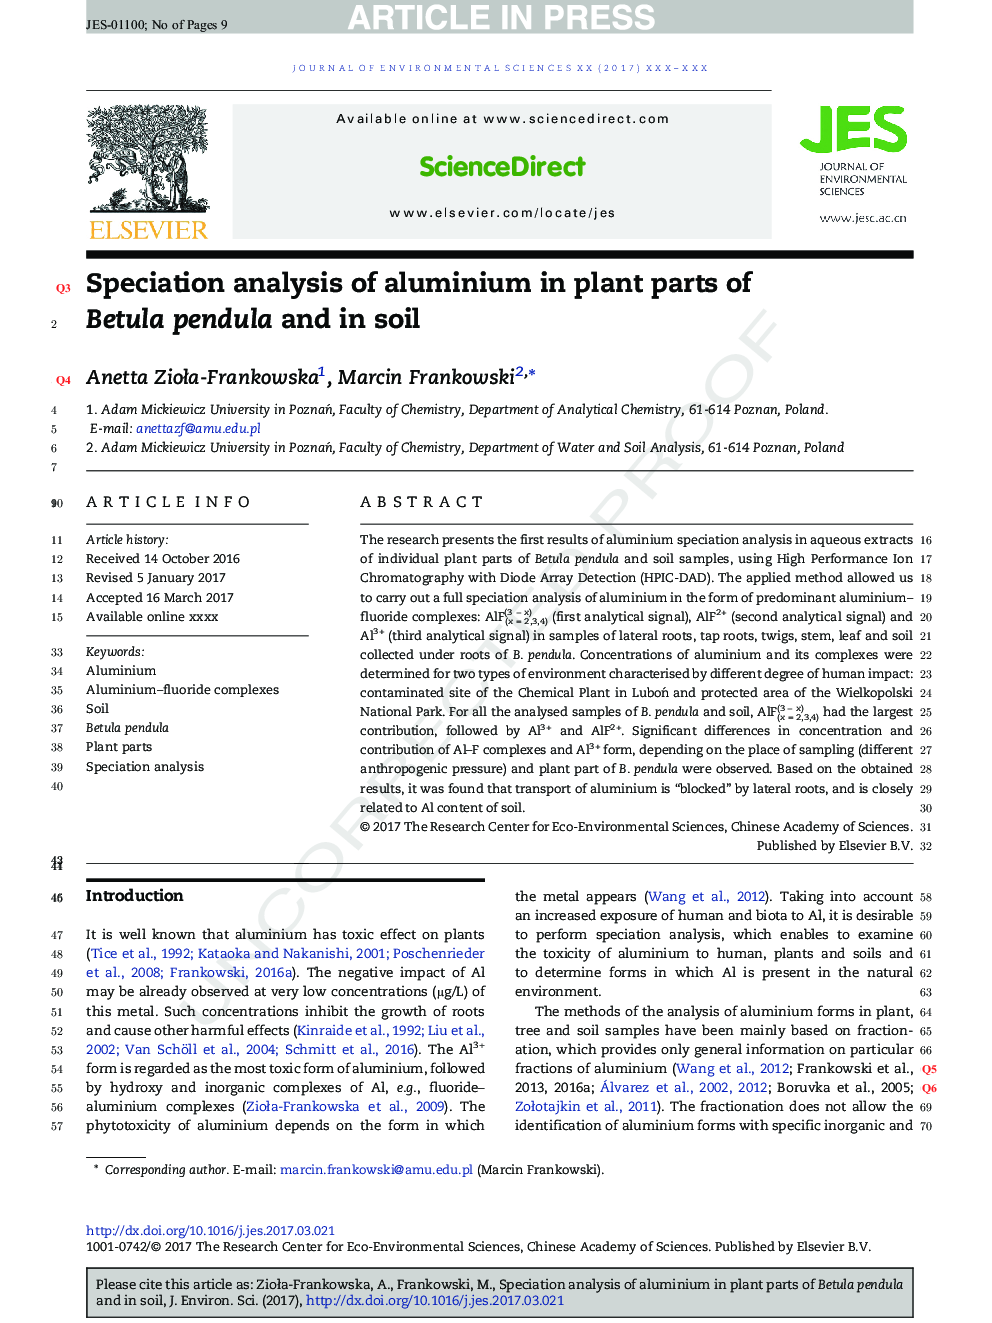 Speciation analysis of aluminium in plant parts of Betula pendula and in soil